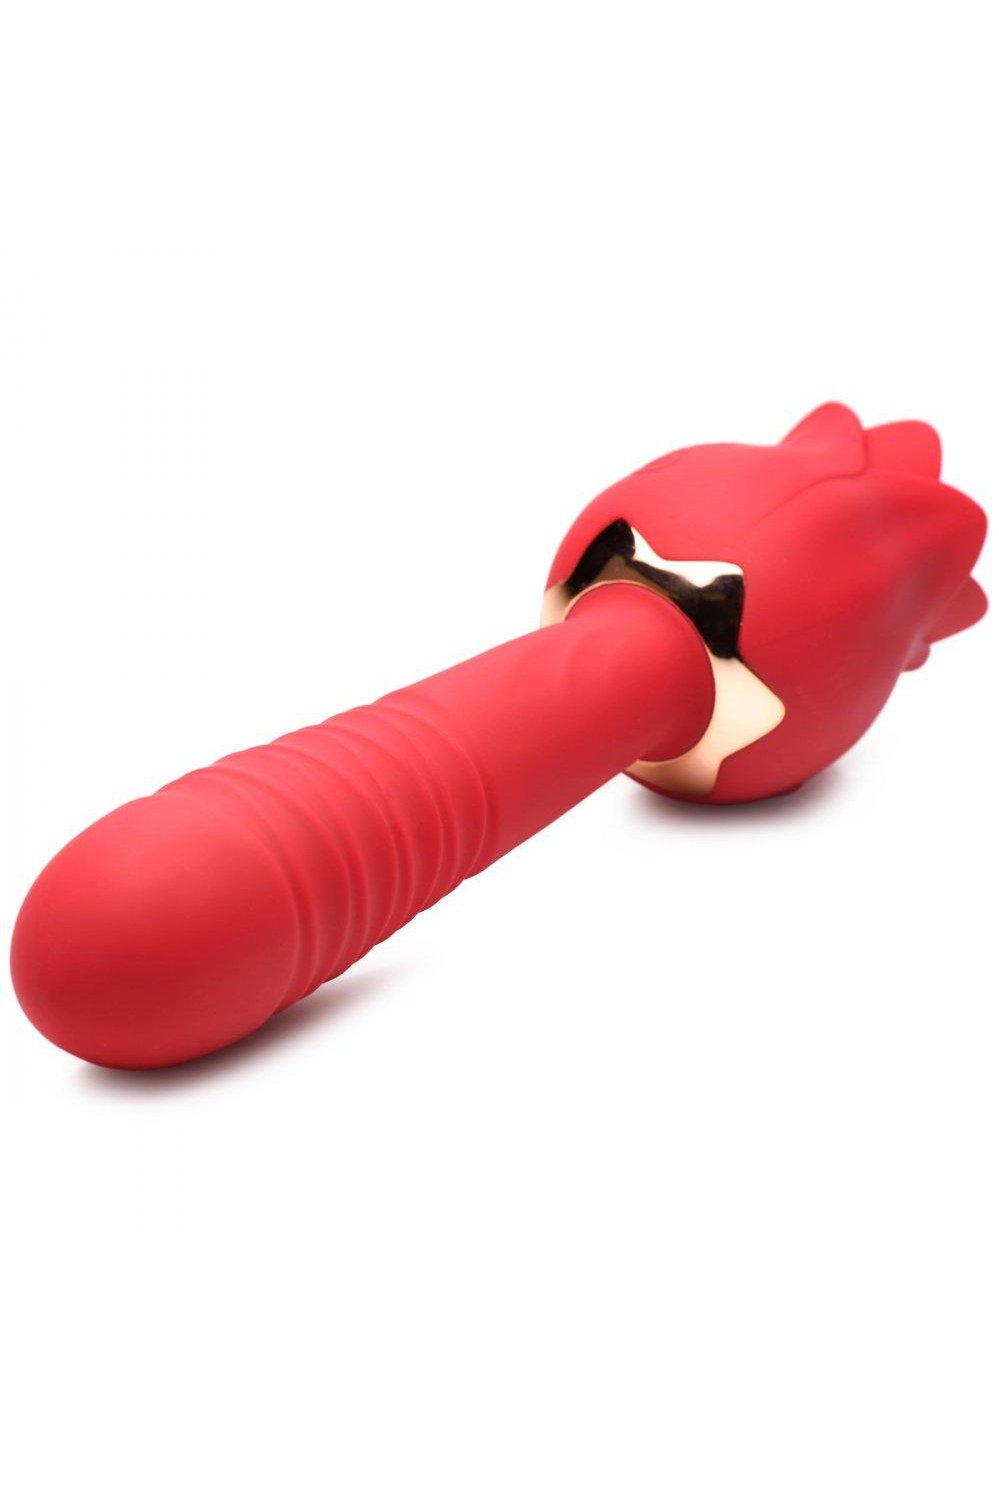 Racy Rose Thrusting and Licking Rose Vibrator - Sex On the Go